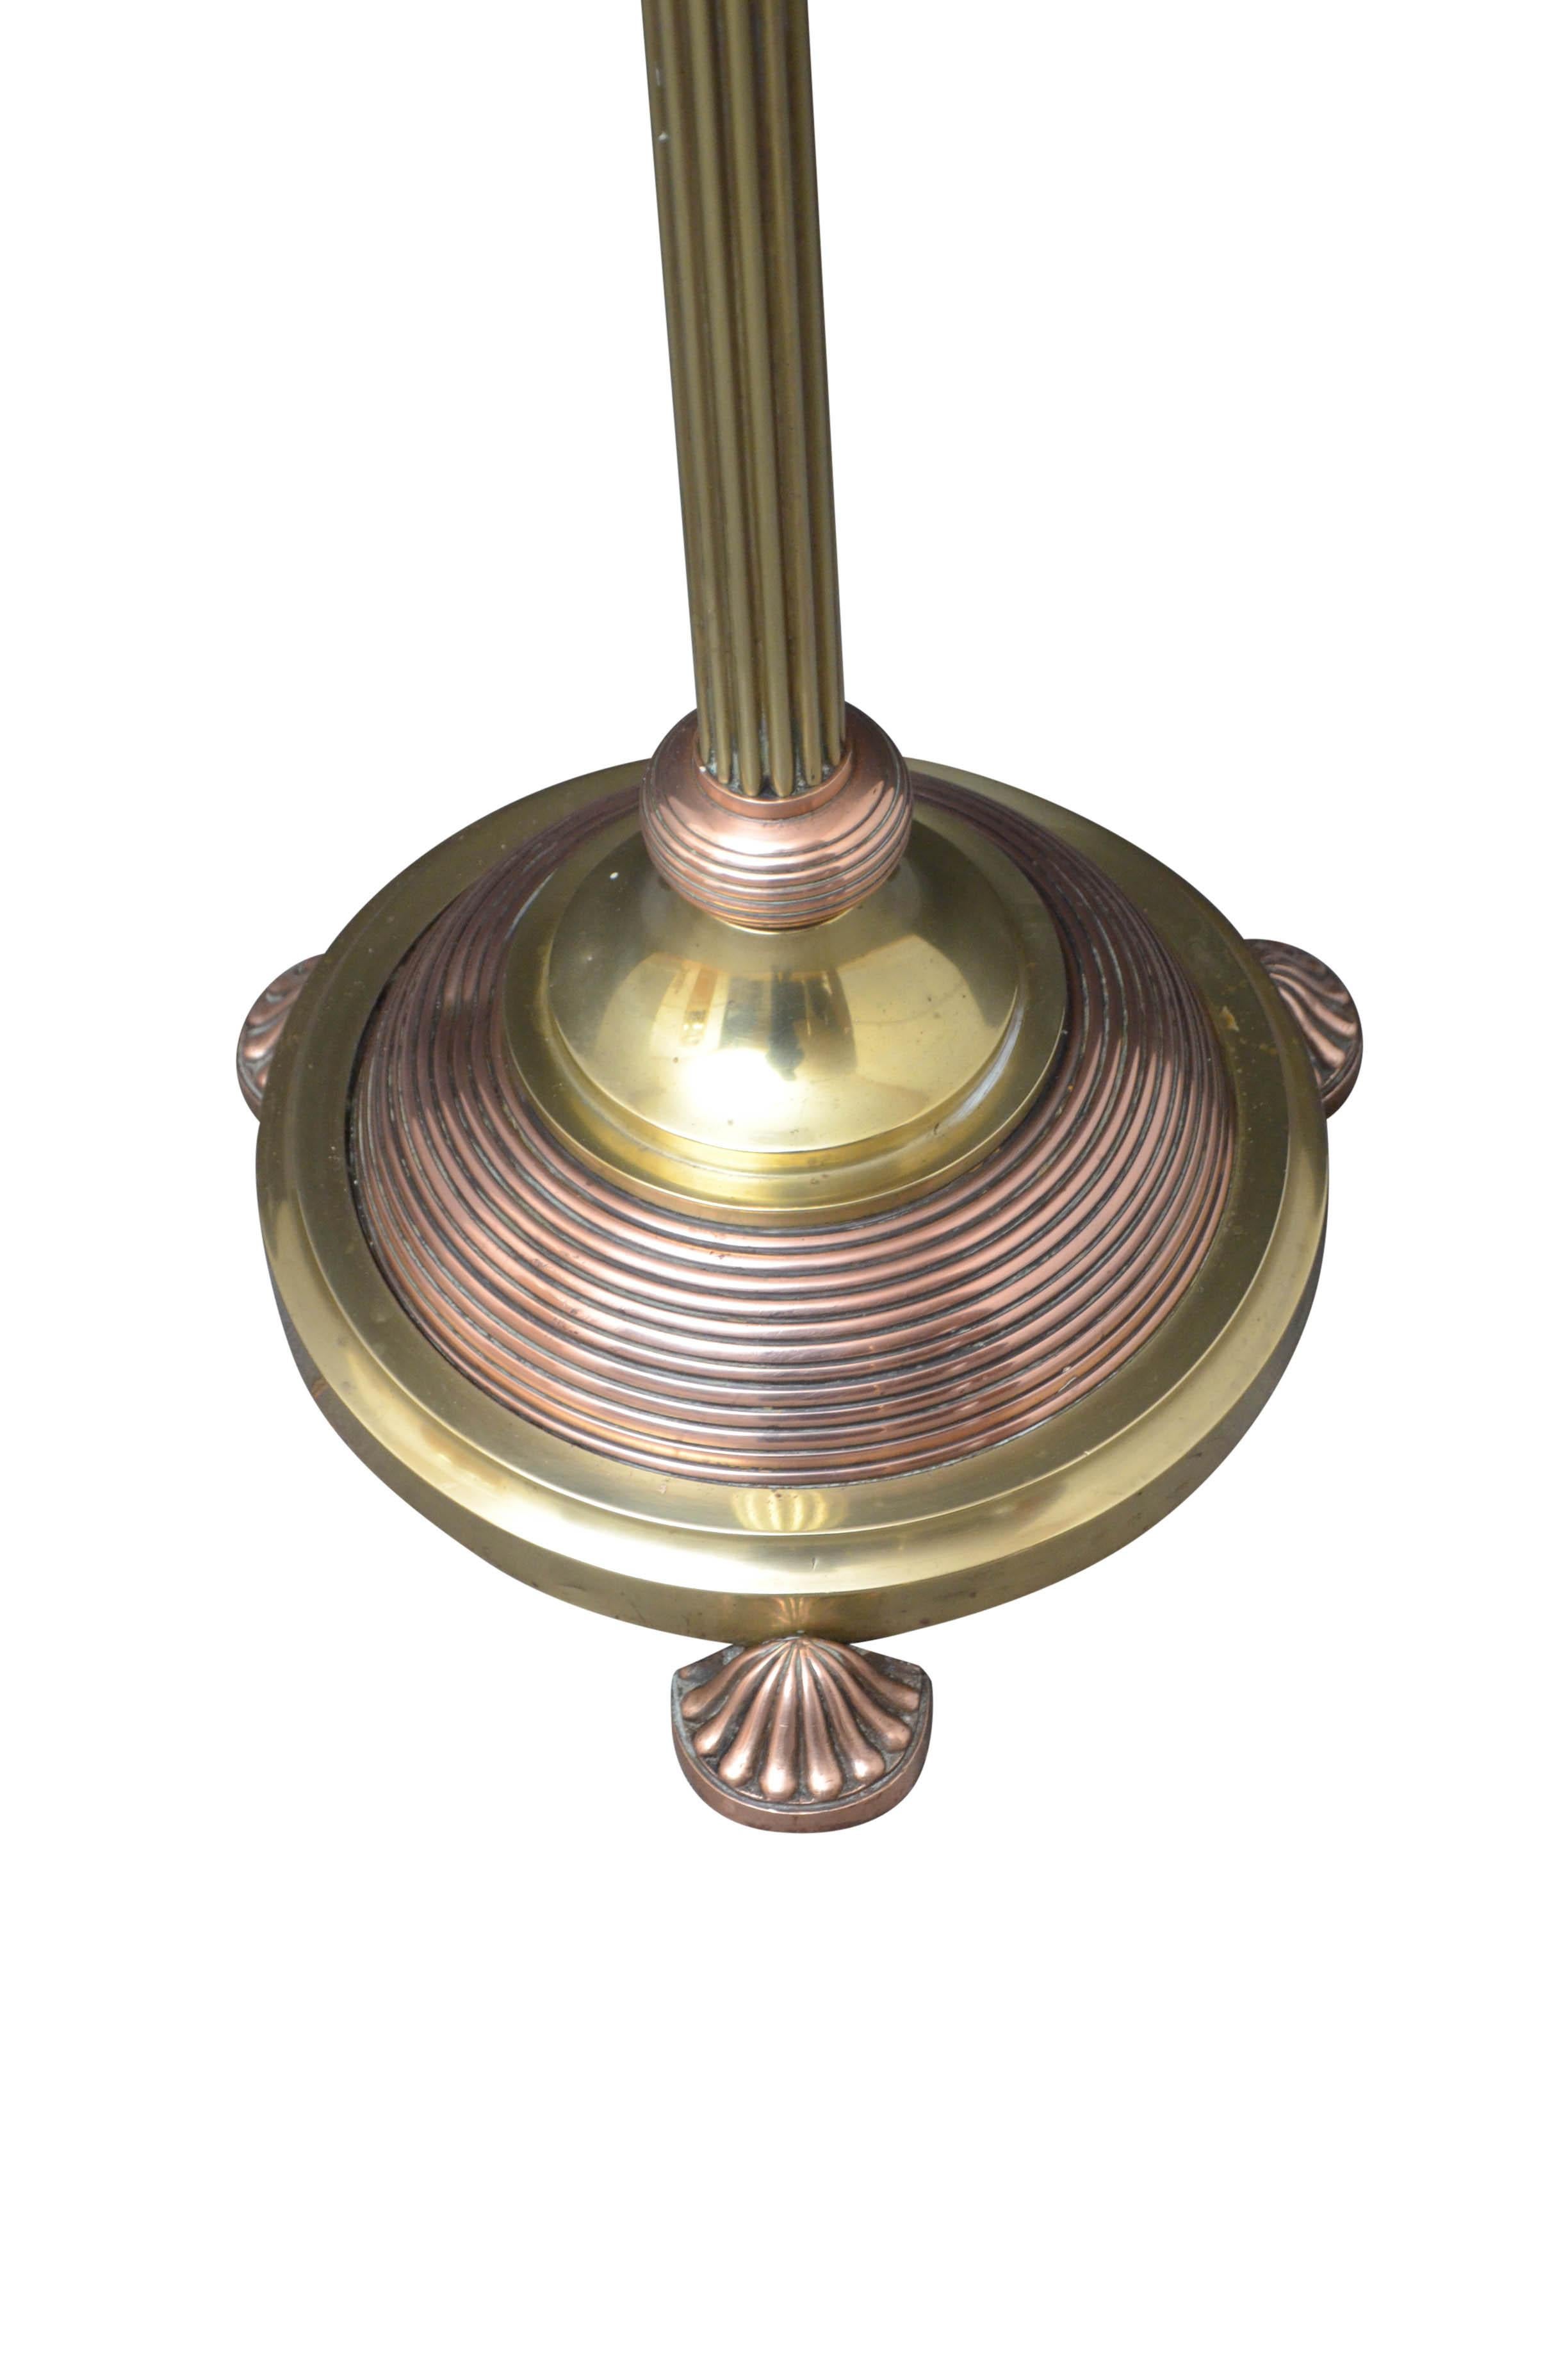 English Edwardian Brass and Copper Floor Standard Lamp